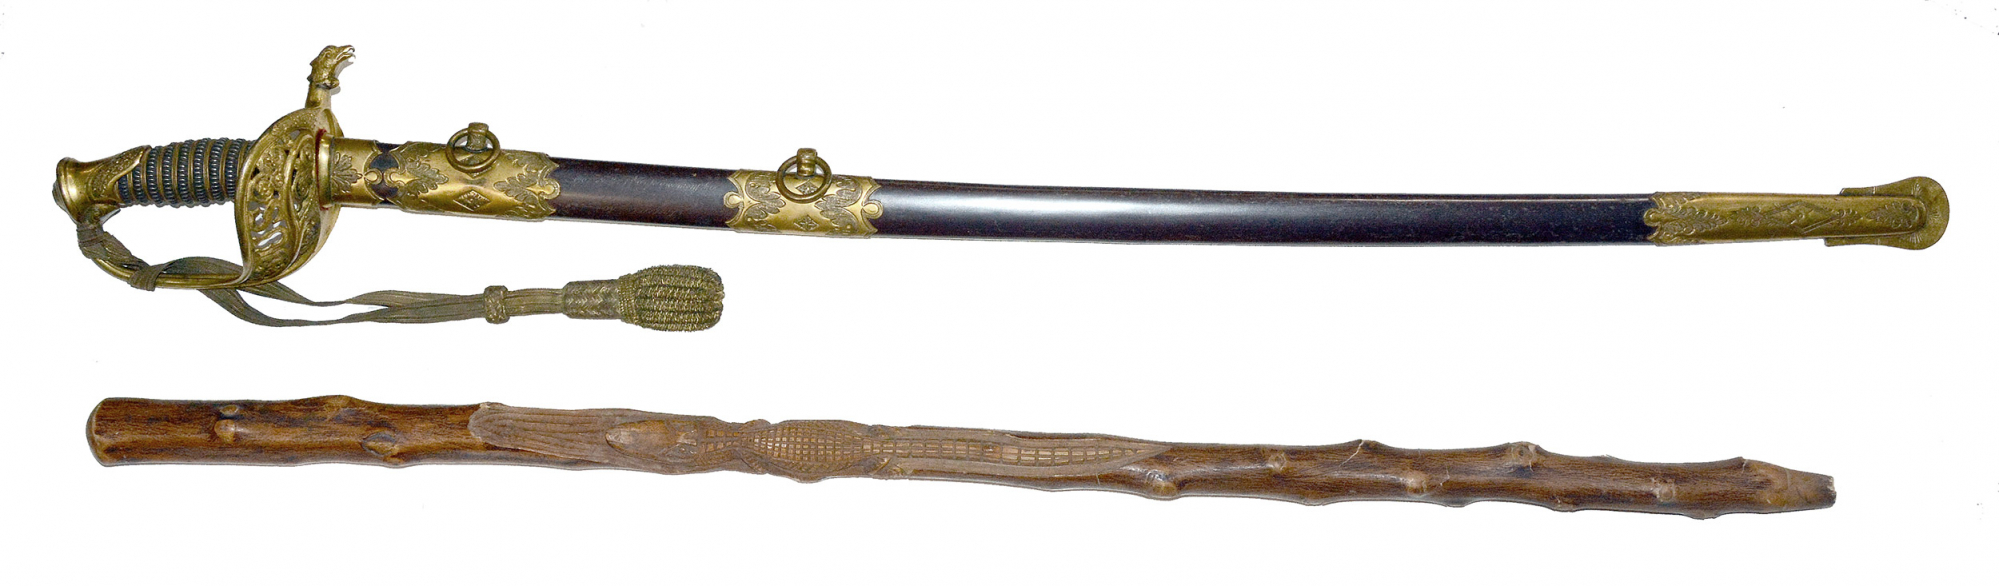 SERVICE IN FOUR MAINE REGIMENTS: 5th, 12th, 25th, and 30th: PRESENTATION M1850 STAFF AND FIELD SWORD WITH THE OFFICER’S CARVED CANE